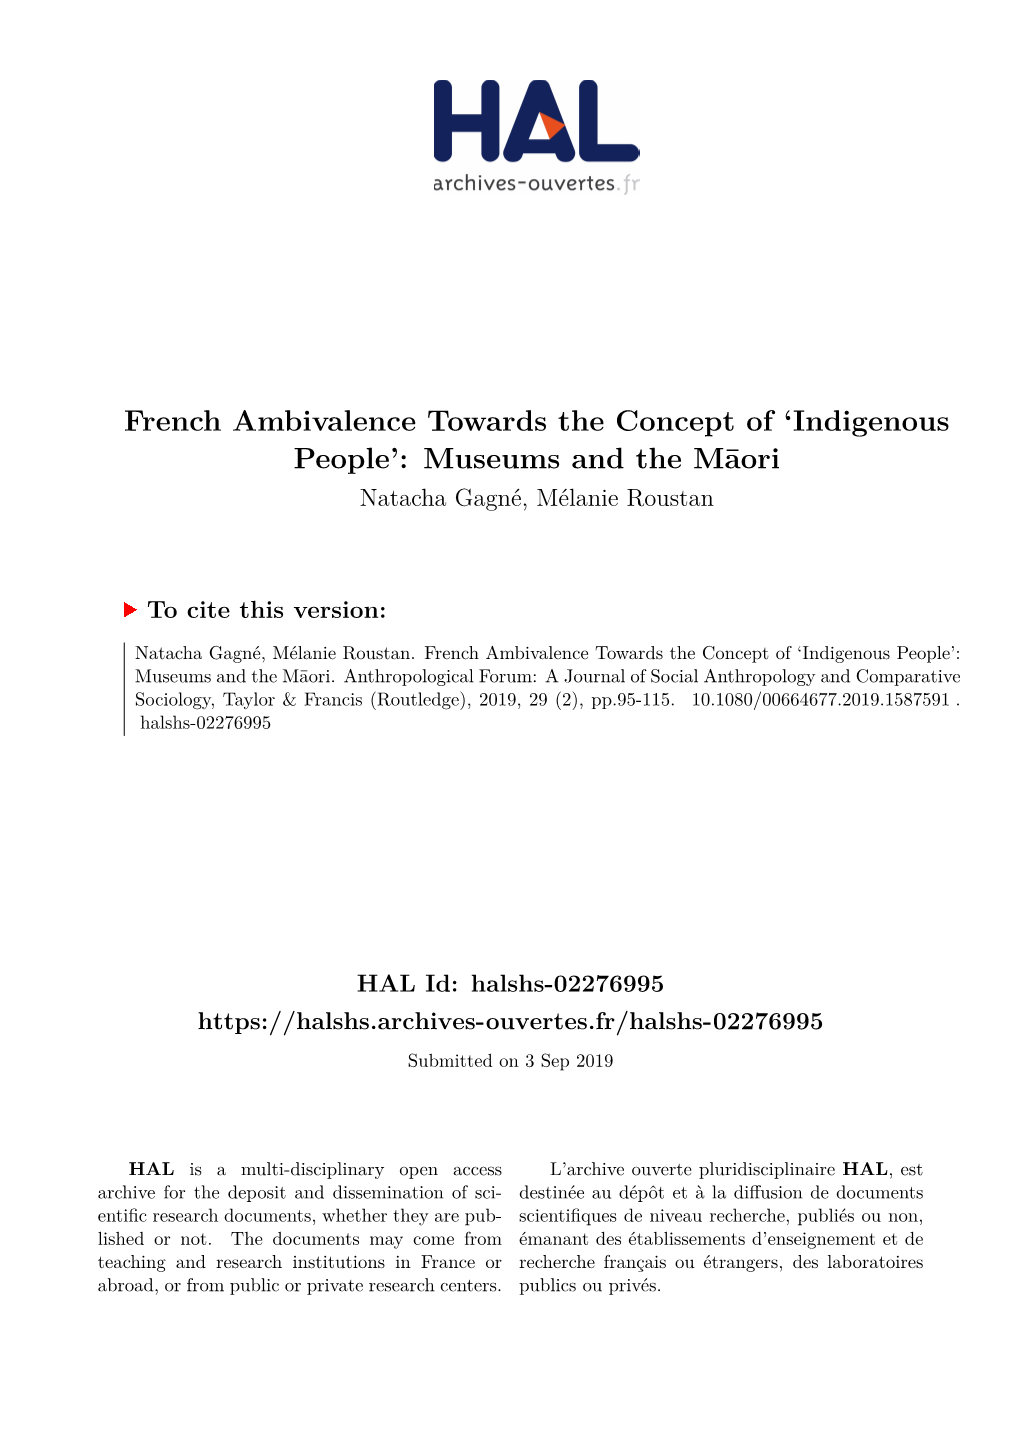 French Ambivalence Towards the Concept of 'Indigenous People'